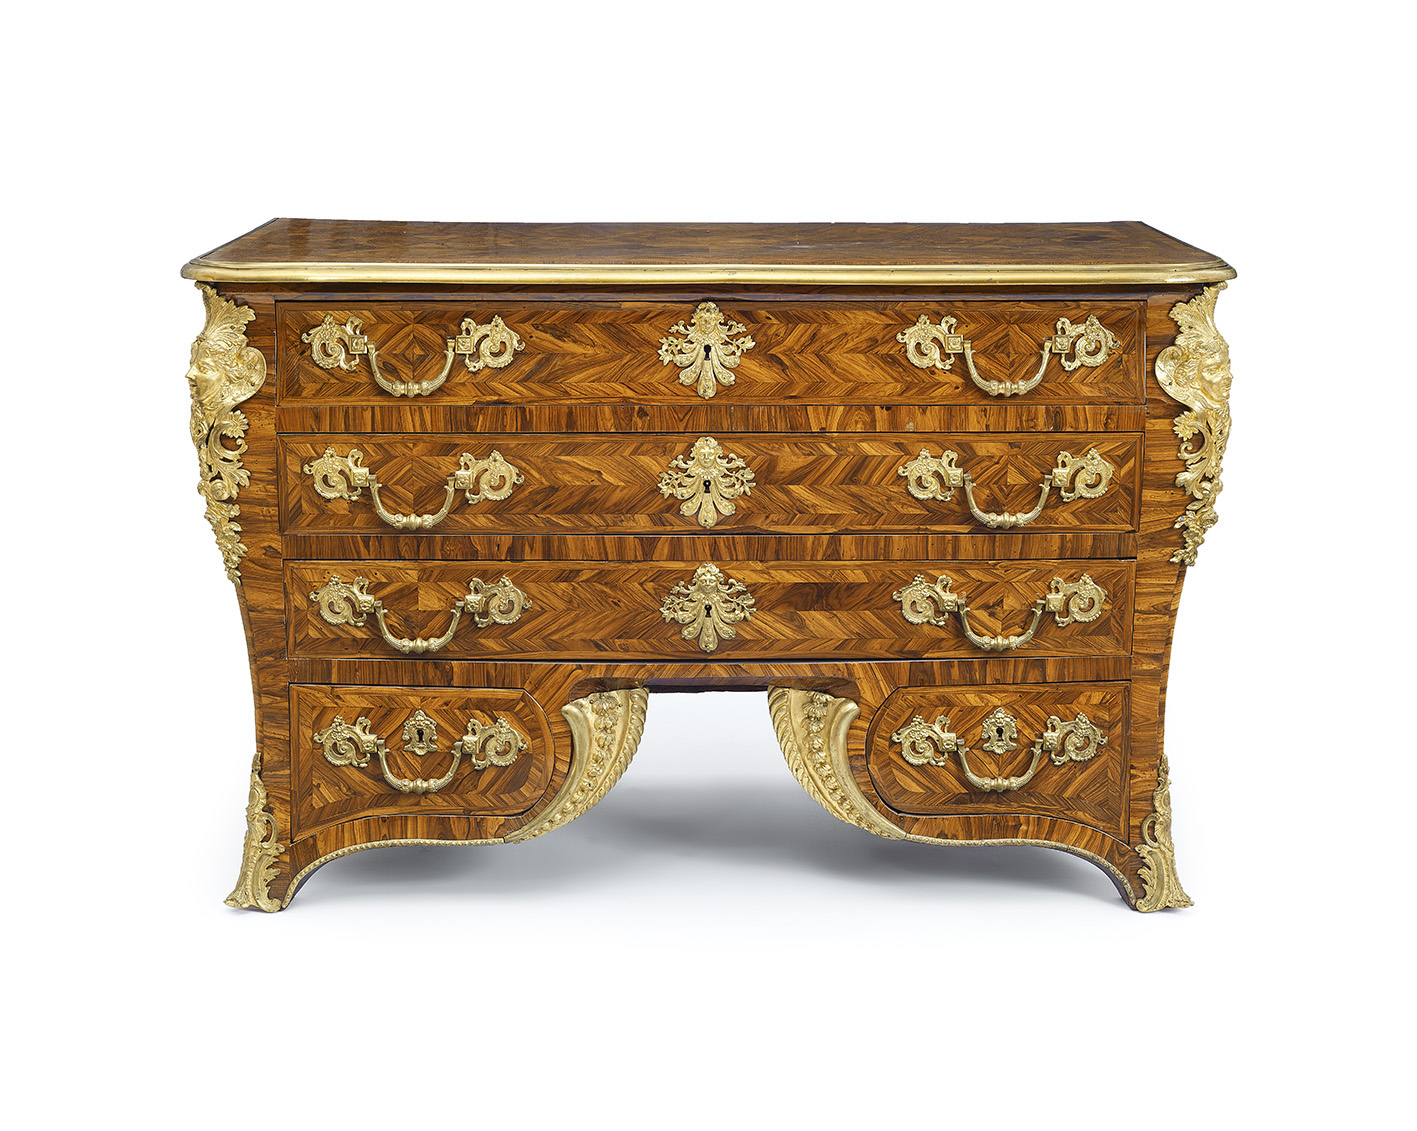 Paris, Regency period, c. 1720-1730. “Tombeau à pont” commode once owned by Maria Callas, kingwood veneer on soft wood and walnut, gilt br